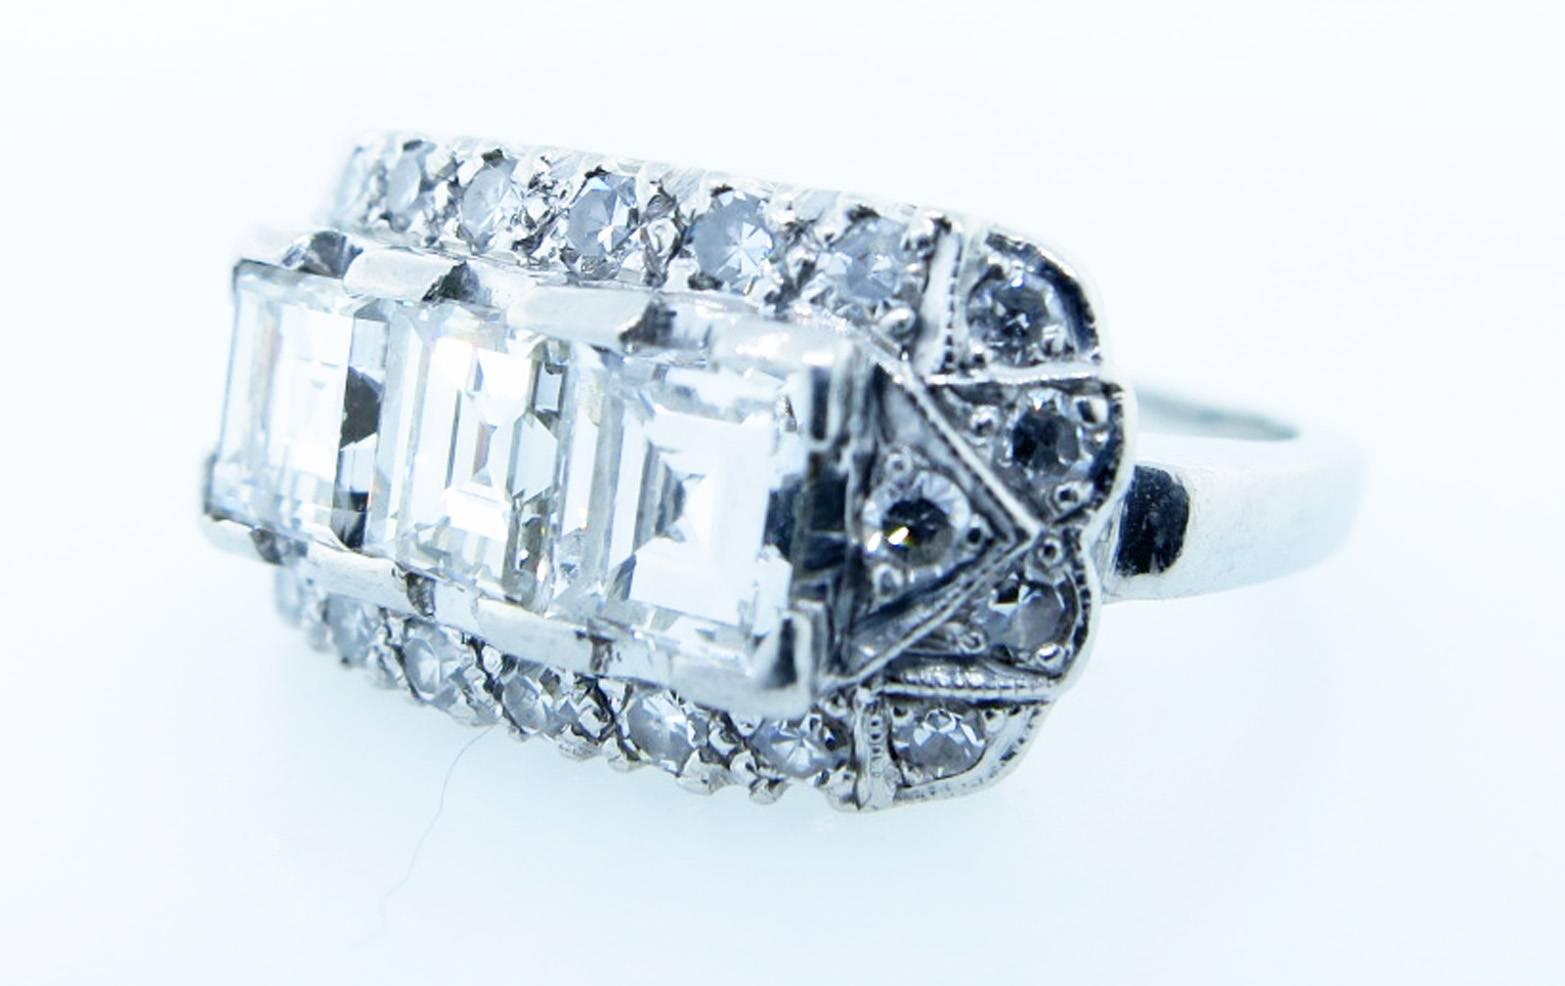 Fine quality handmade platinum mount  prong set in the center with three beautifully matched emerald cut diamonds each weighing approx .40cts. grading VS clarity H-I color. The surrounding mount is bead set with 22 round diamonds totaling approx